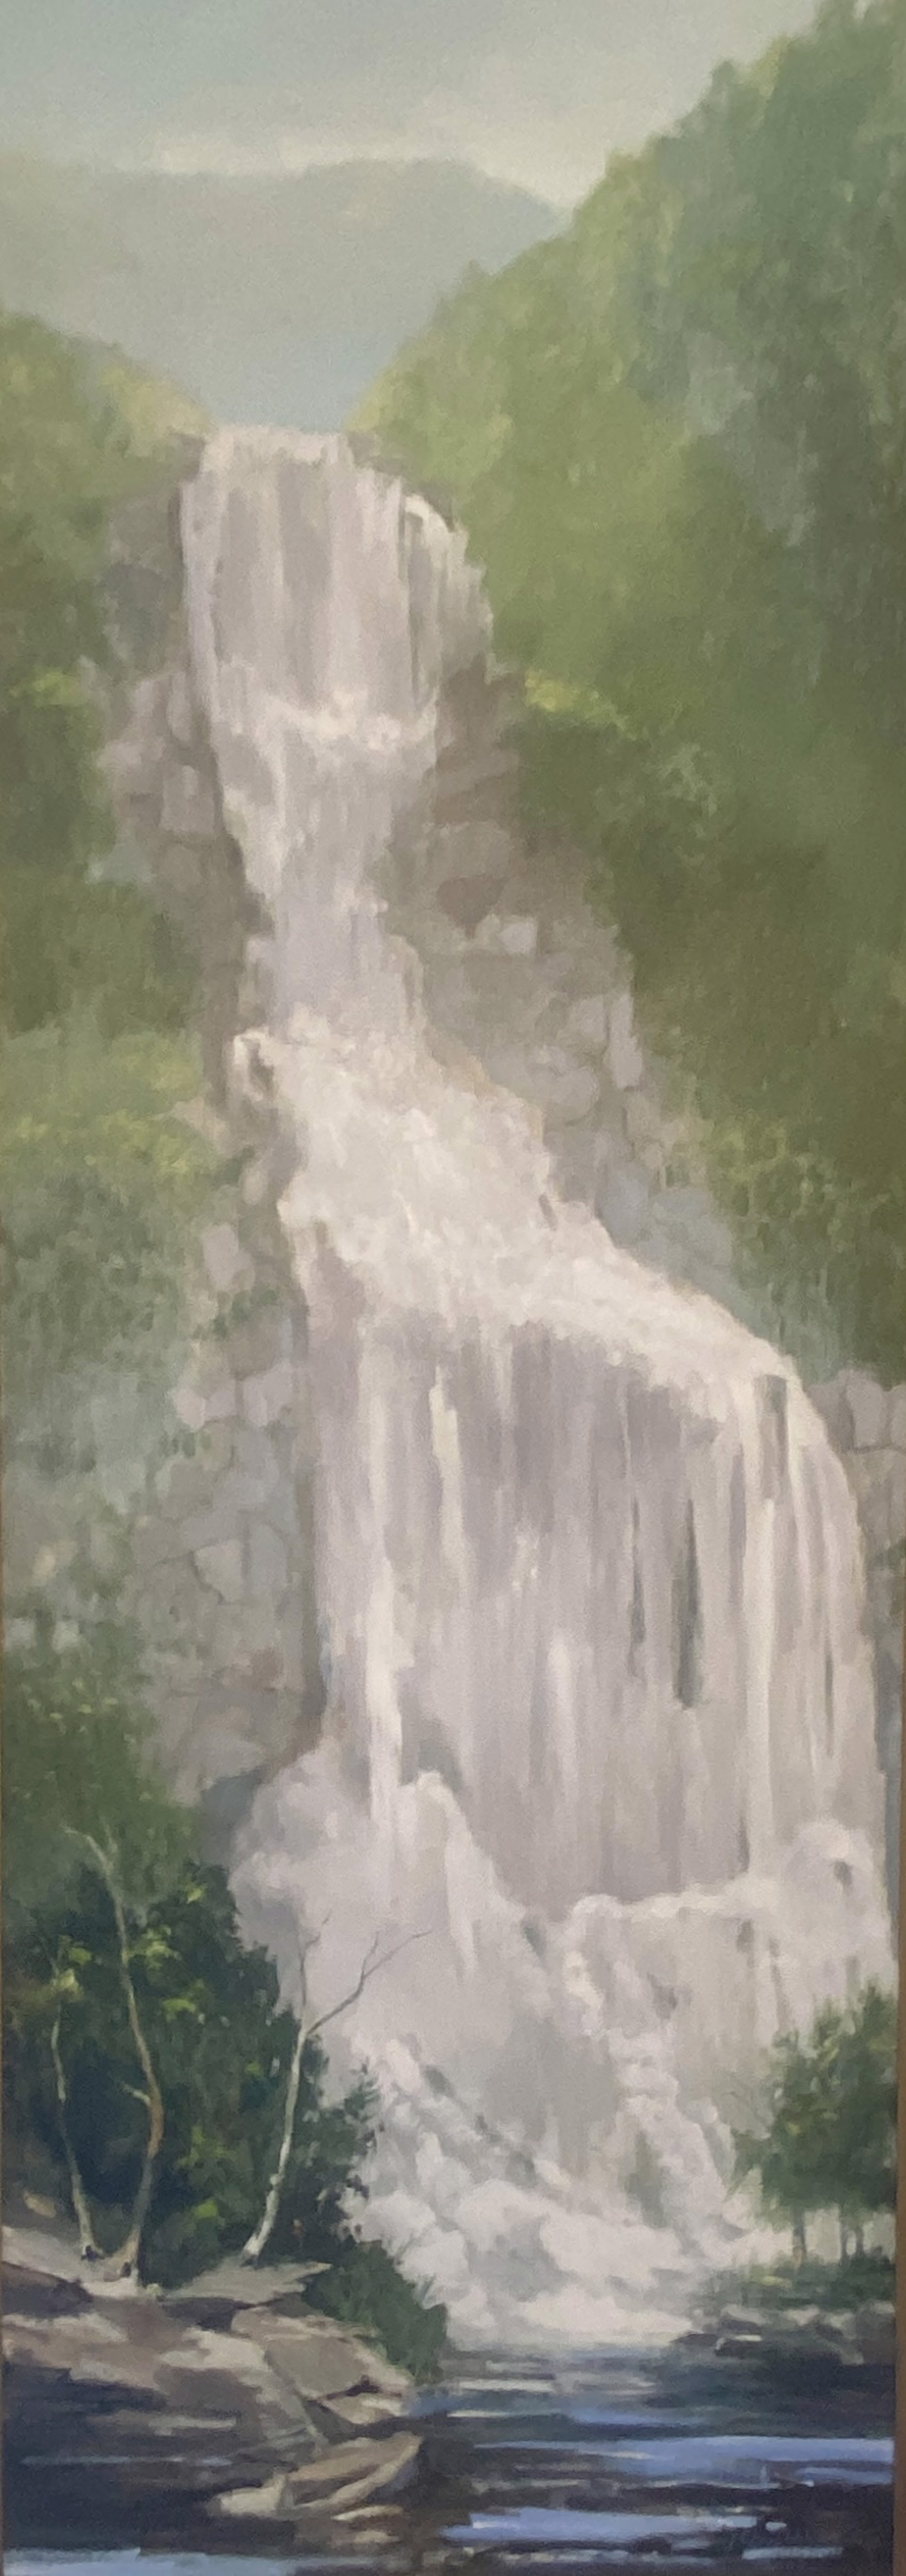 waterfall with rocks and trees